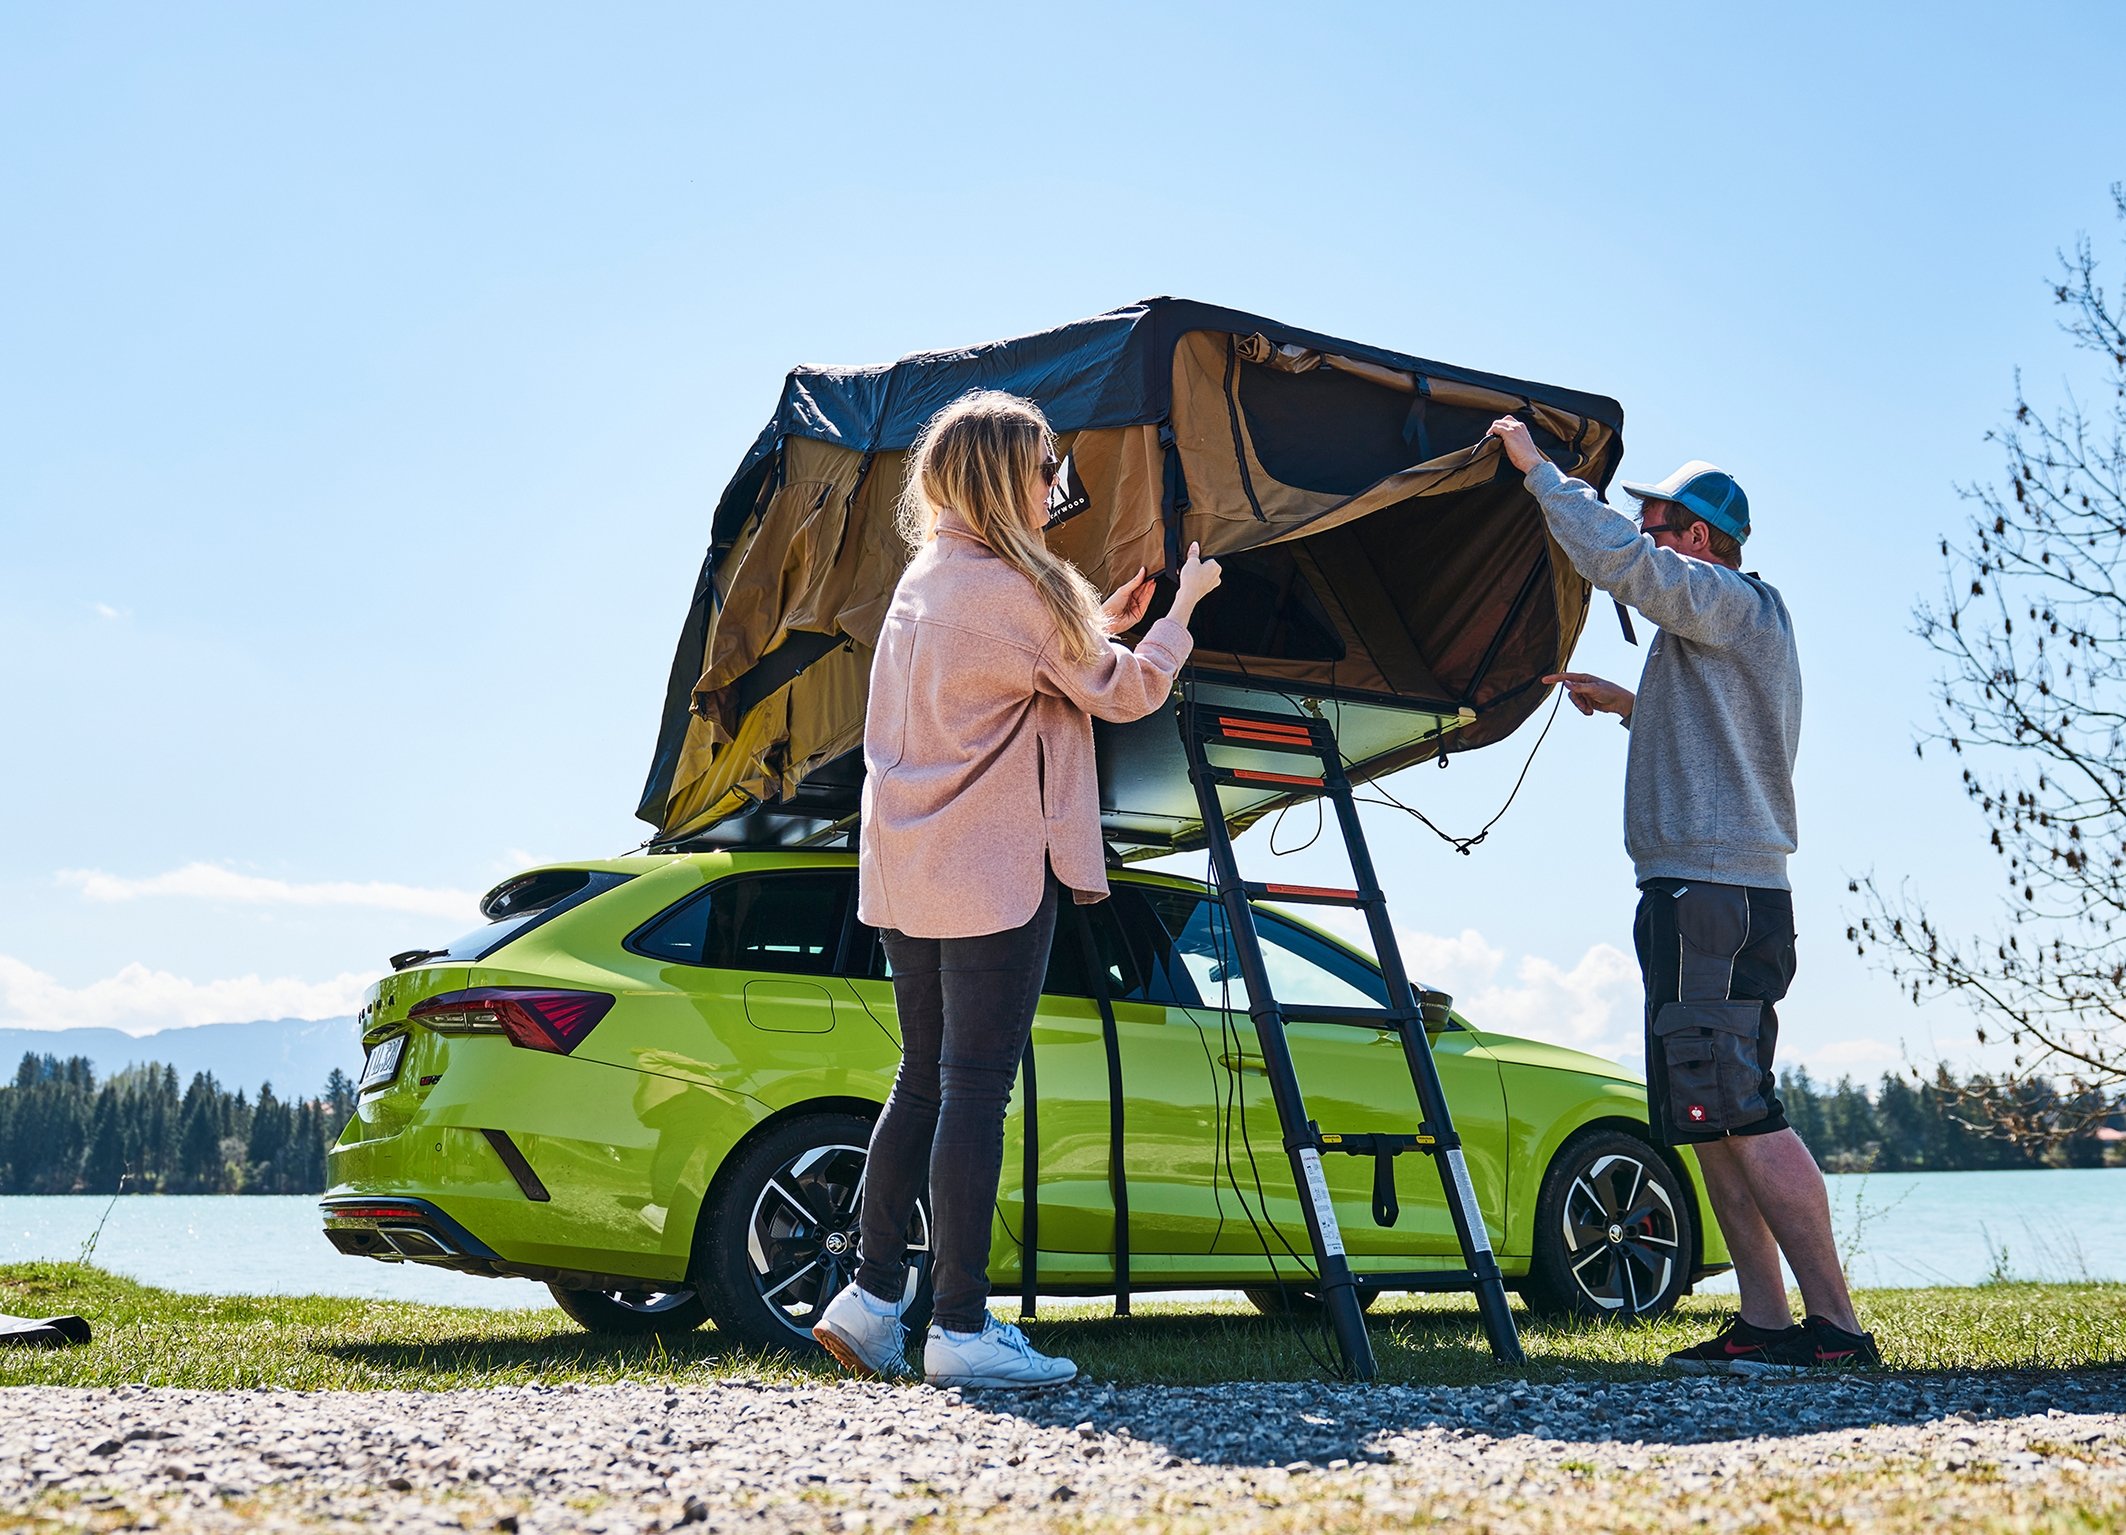 New style of camping: Roof tents for cars offer unique experience